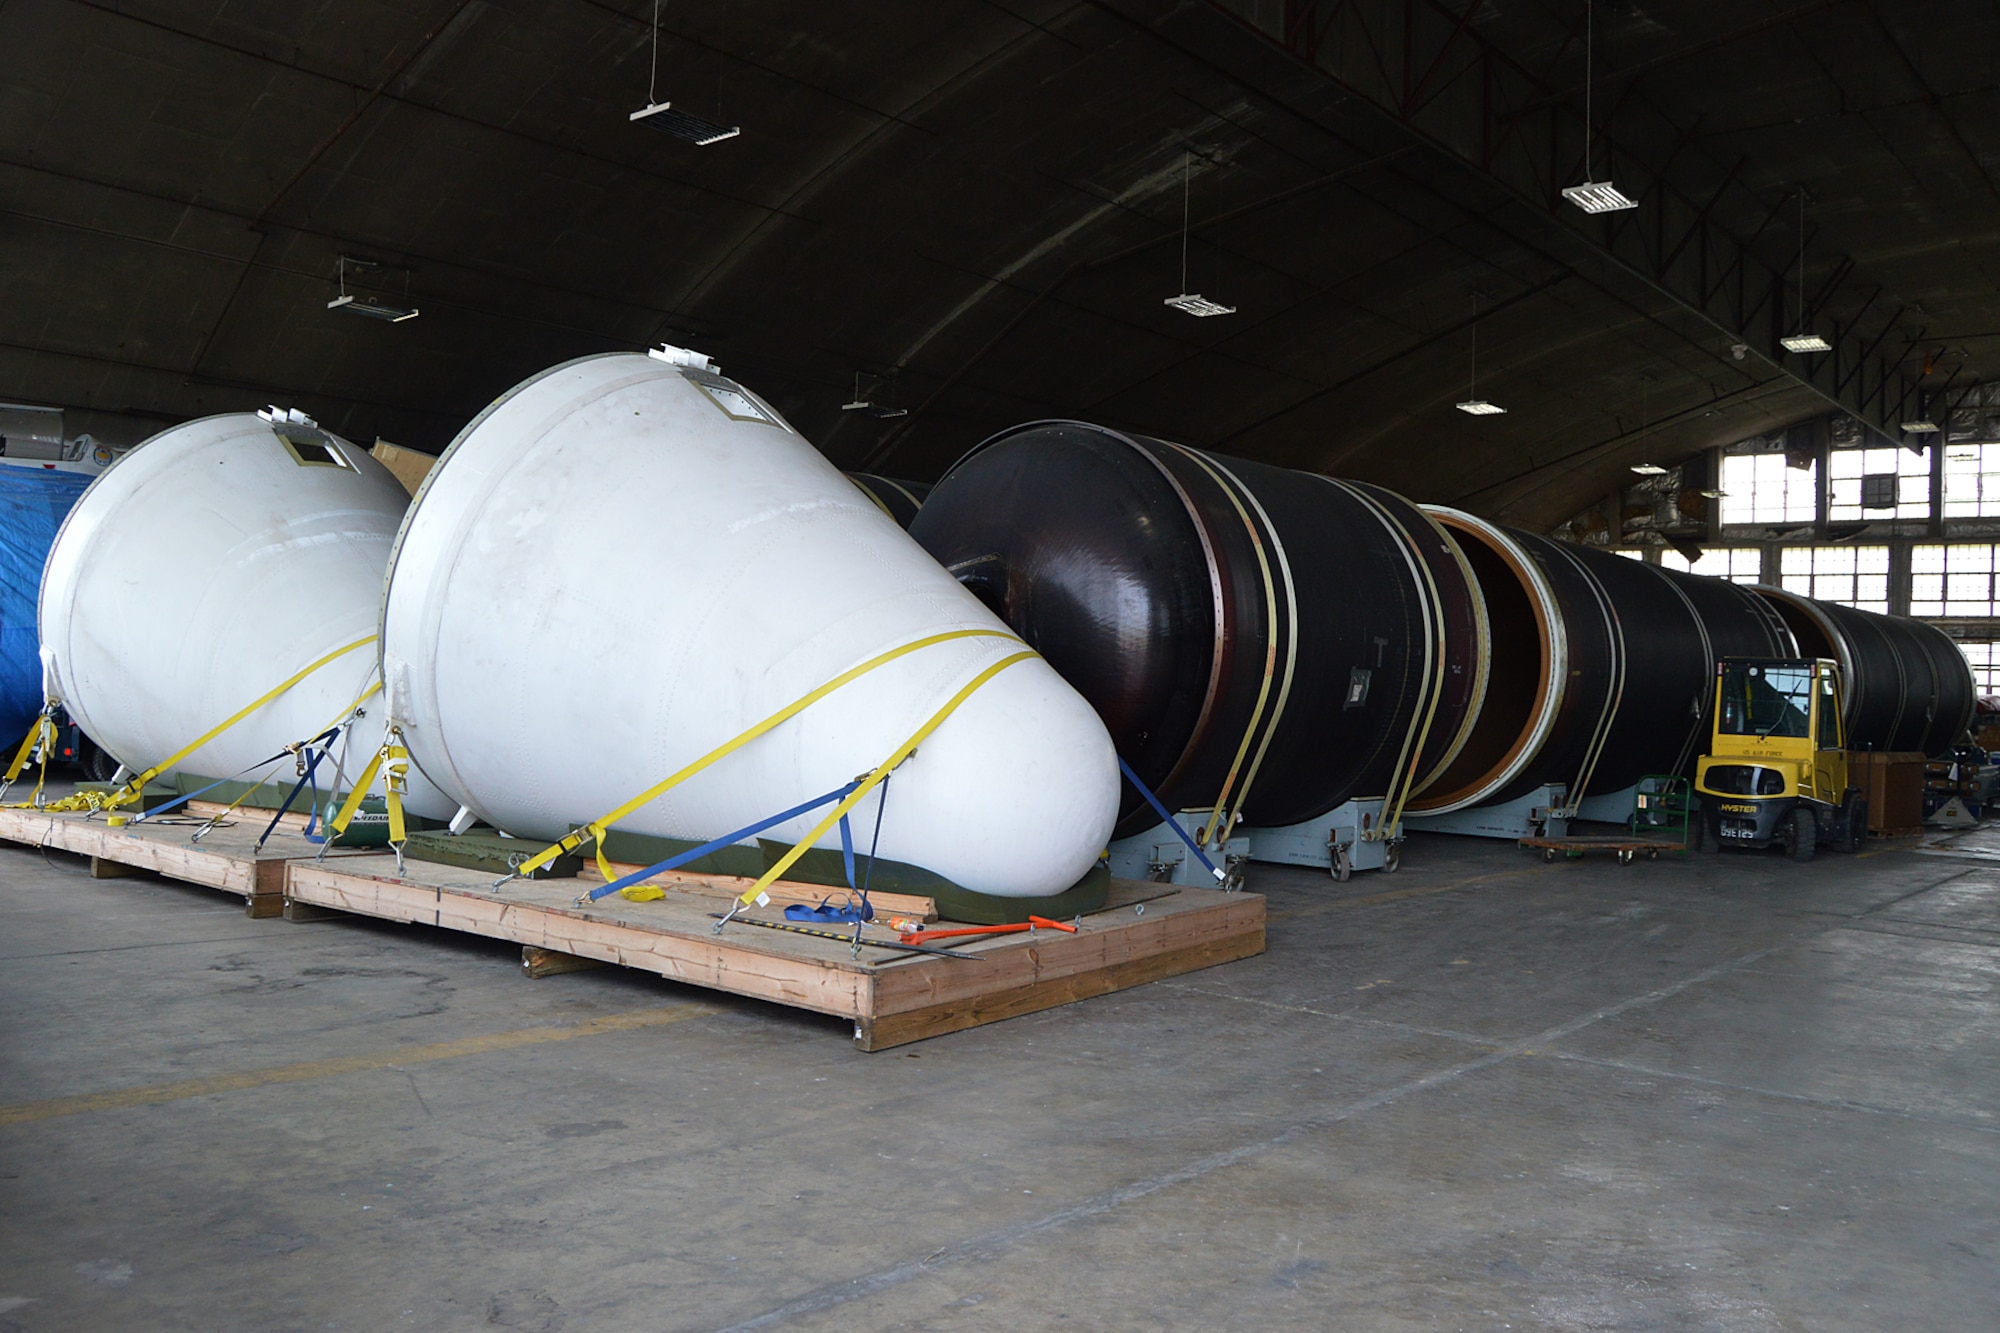 DAYTON, Ohio -- The Titan IVB space launch vehicle in the restoration hangar at the National Museum of the United States Air Force. These are the solid rocket motor units and nose cones. (U.S. Air Force photo)
